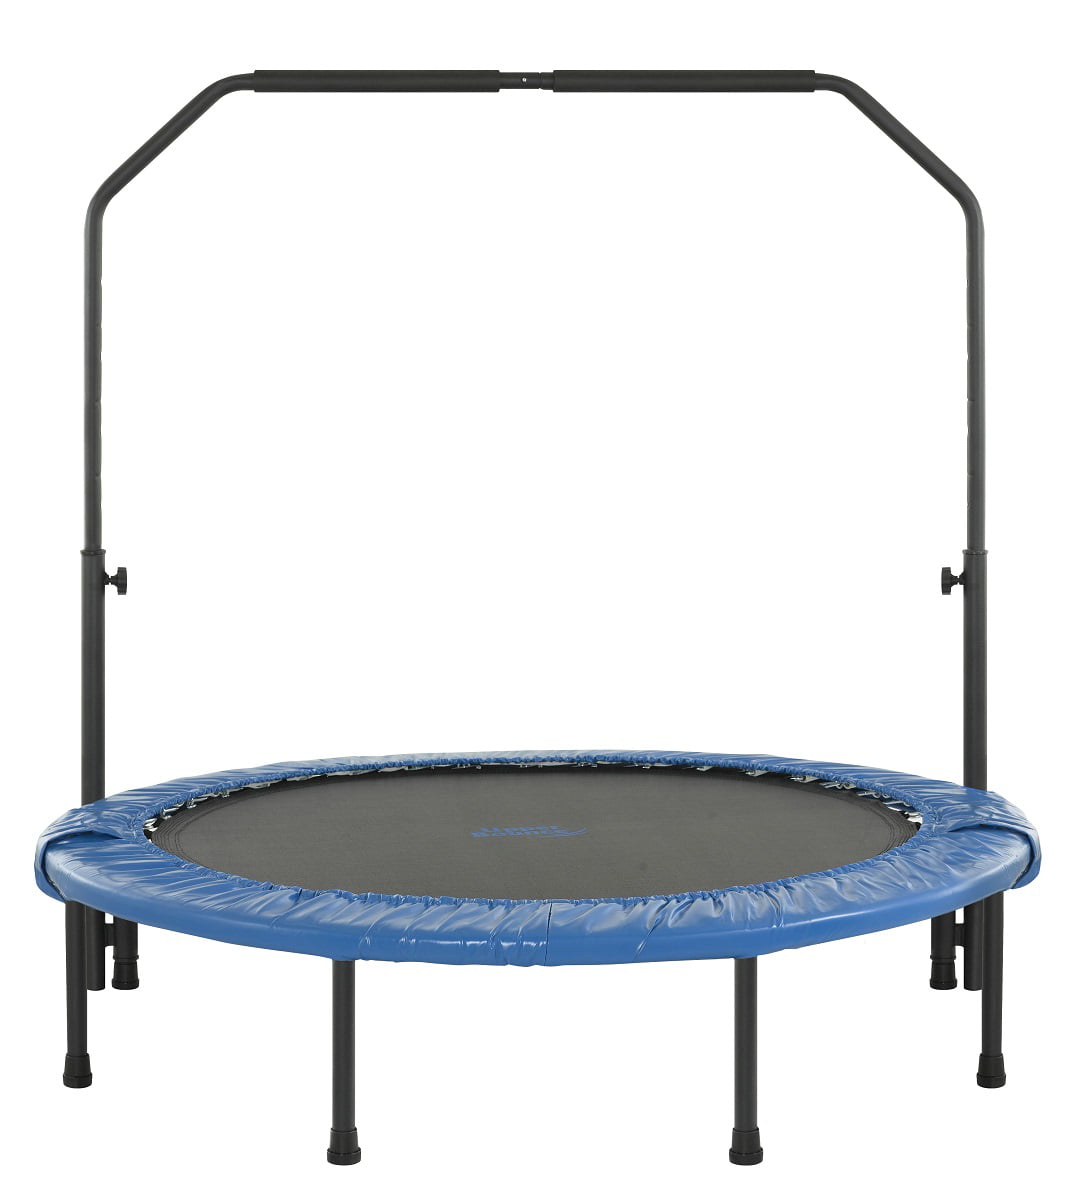 Details about   NEW Mini Foldable Trampoline With Bar Urban Rebounder Bouncing Exercise Yoga Gym 